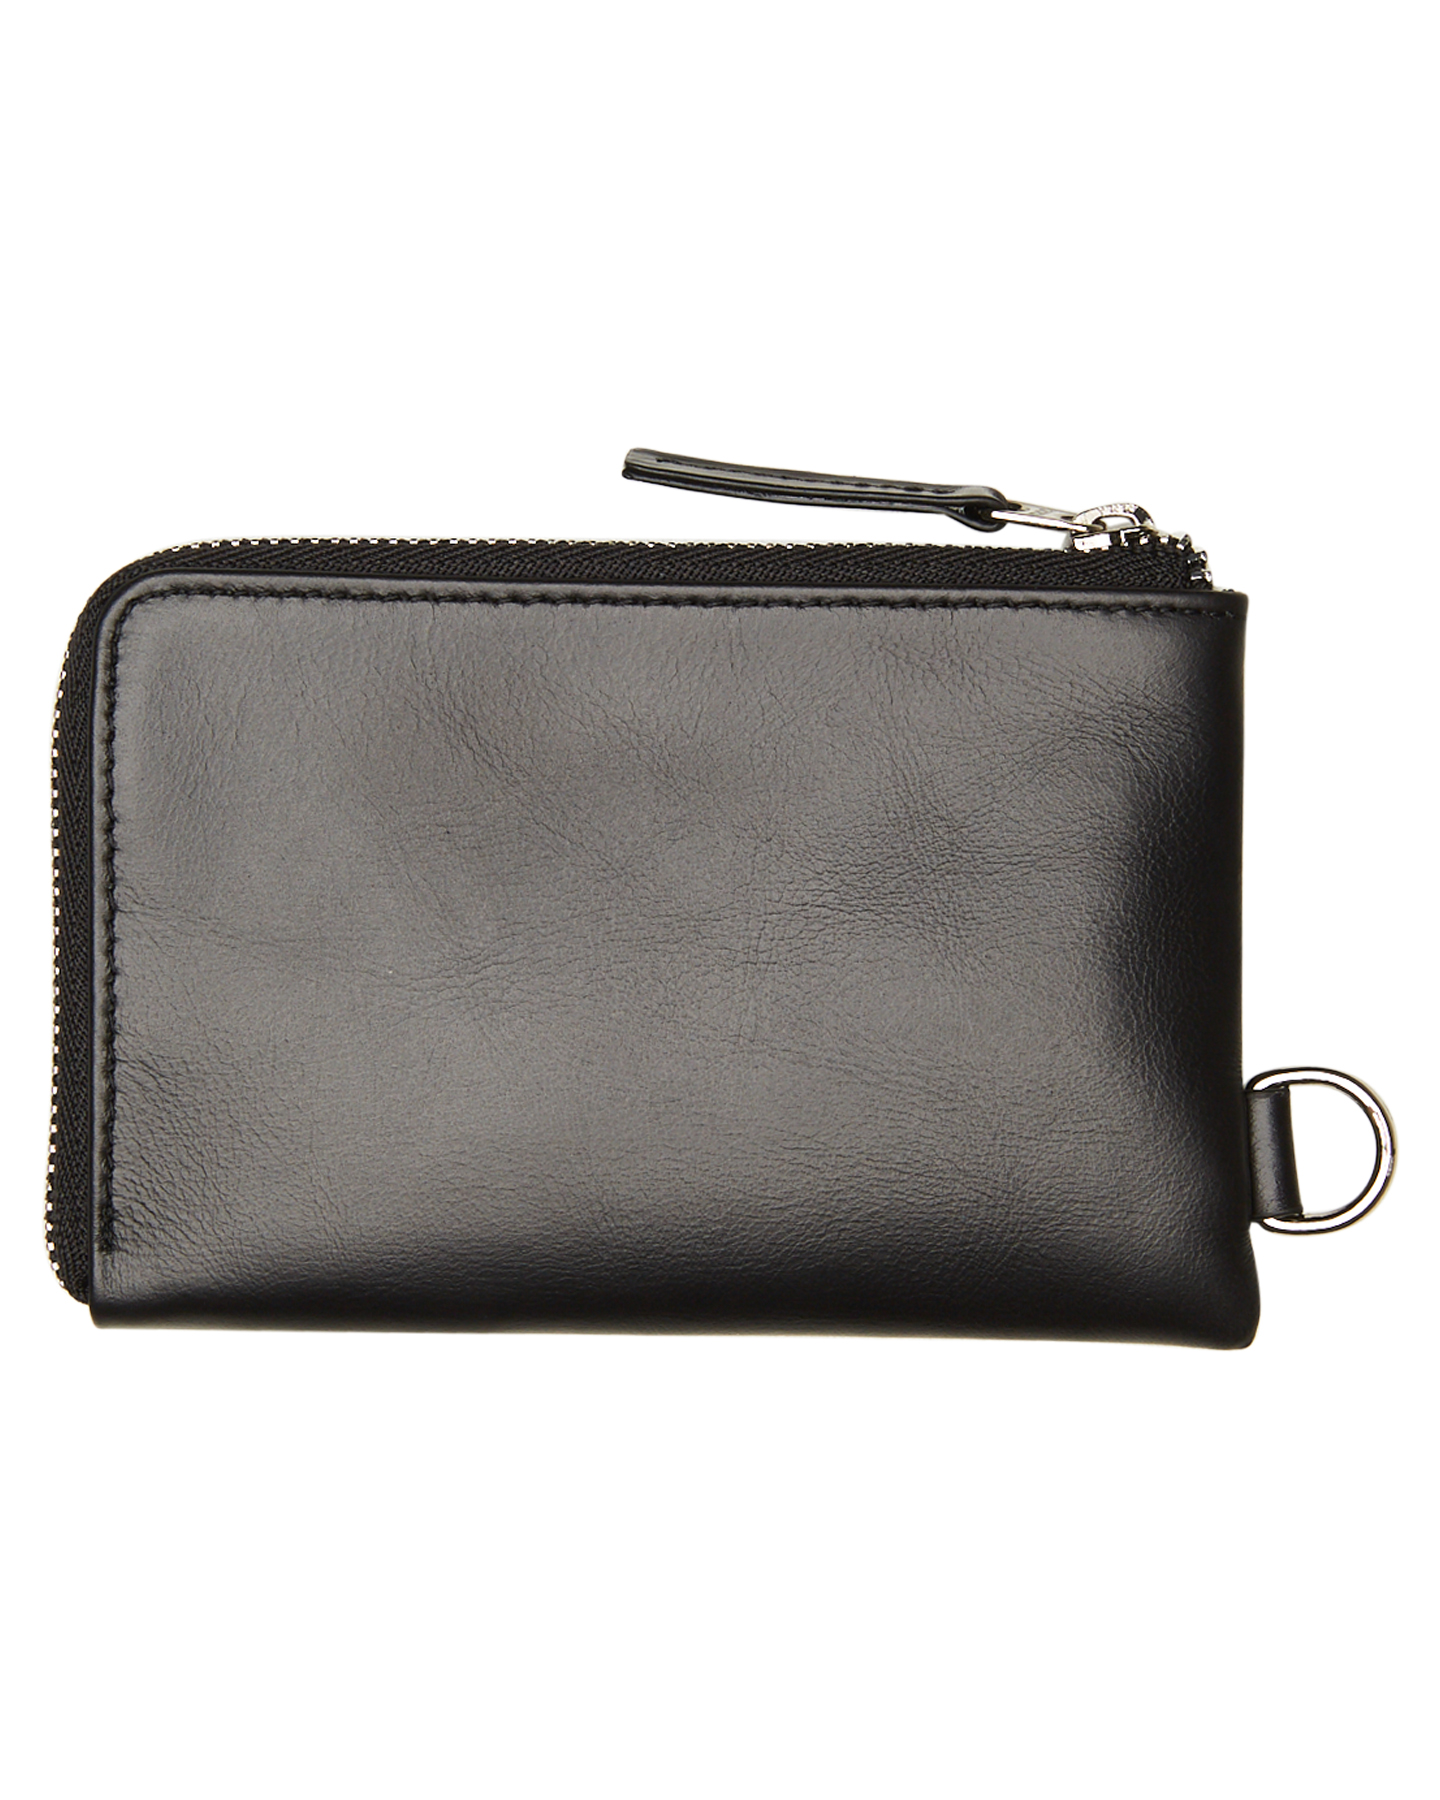 Atlas Lifestyle Co The Double Zip Leather Wallet - Black | SurfStitch